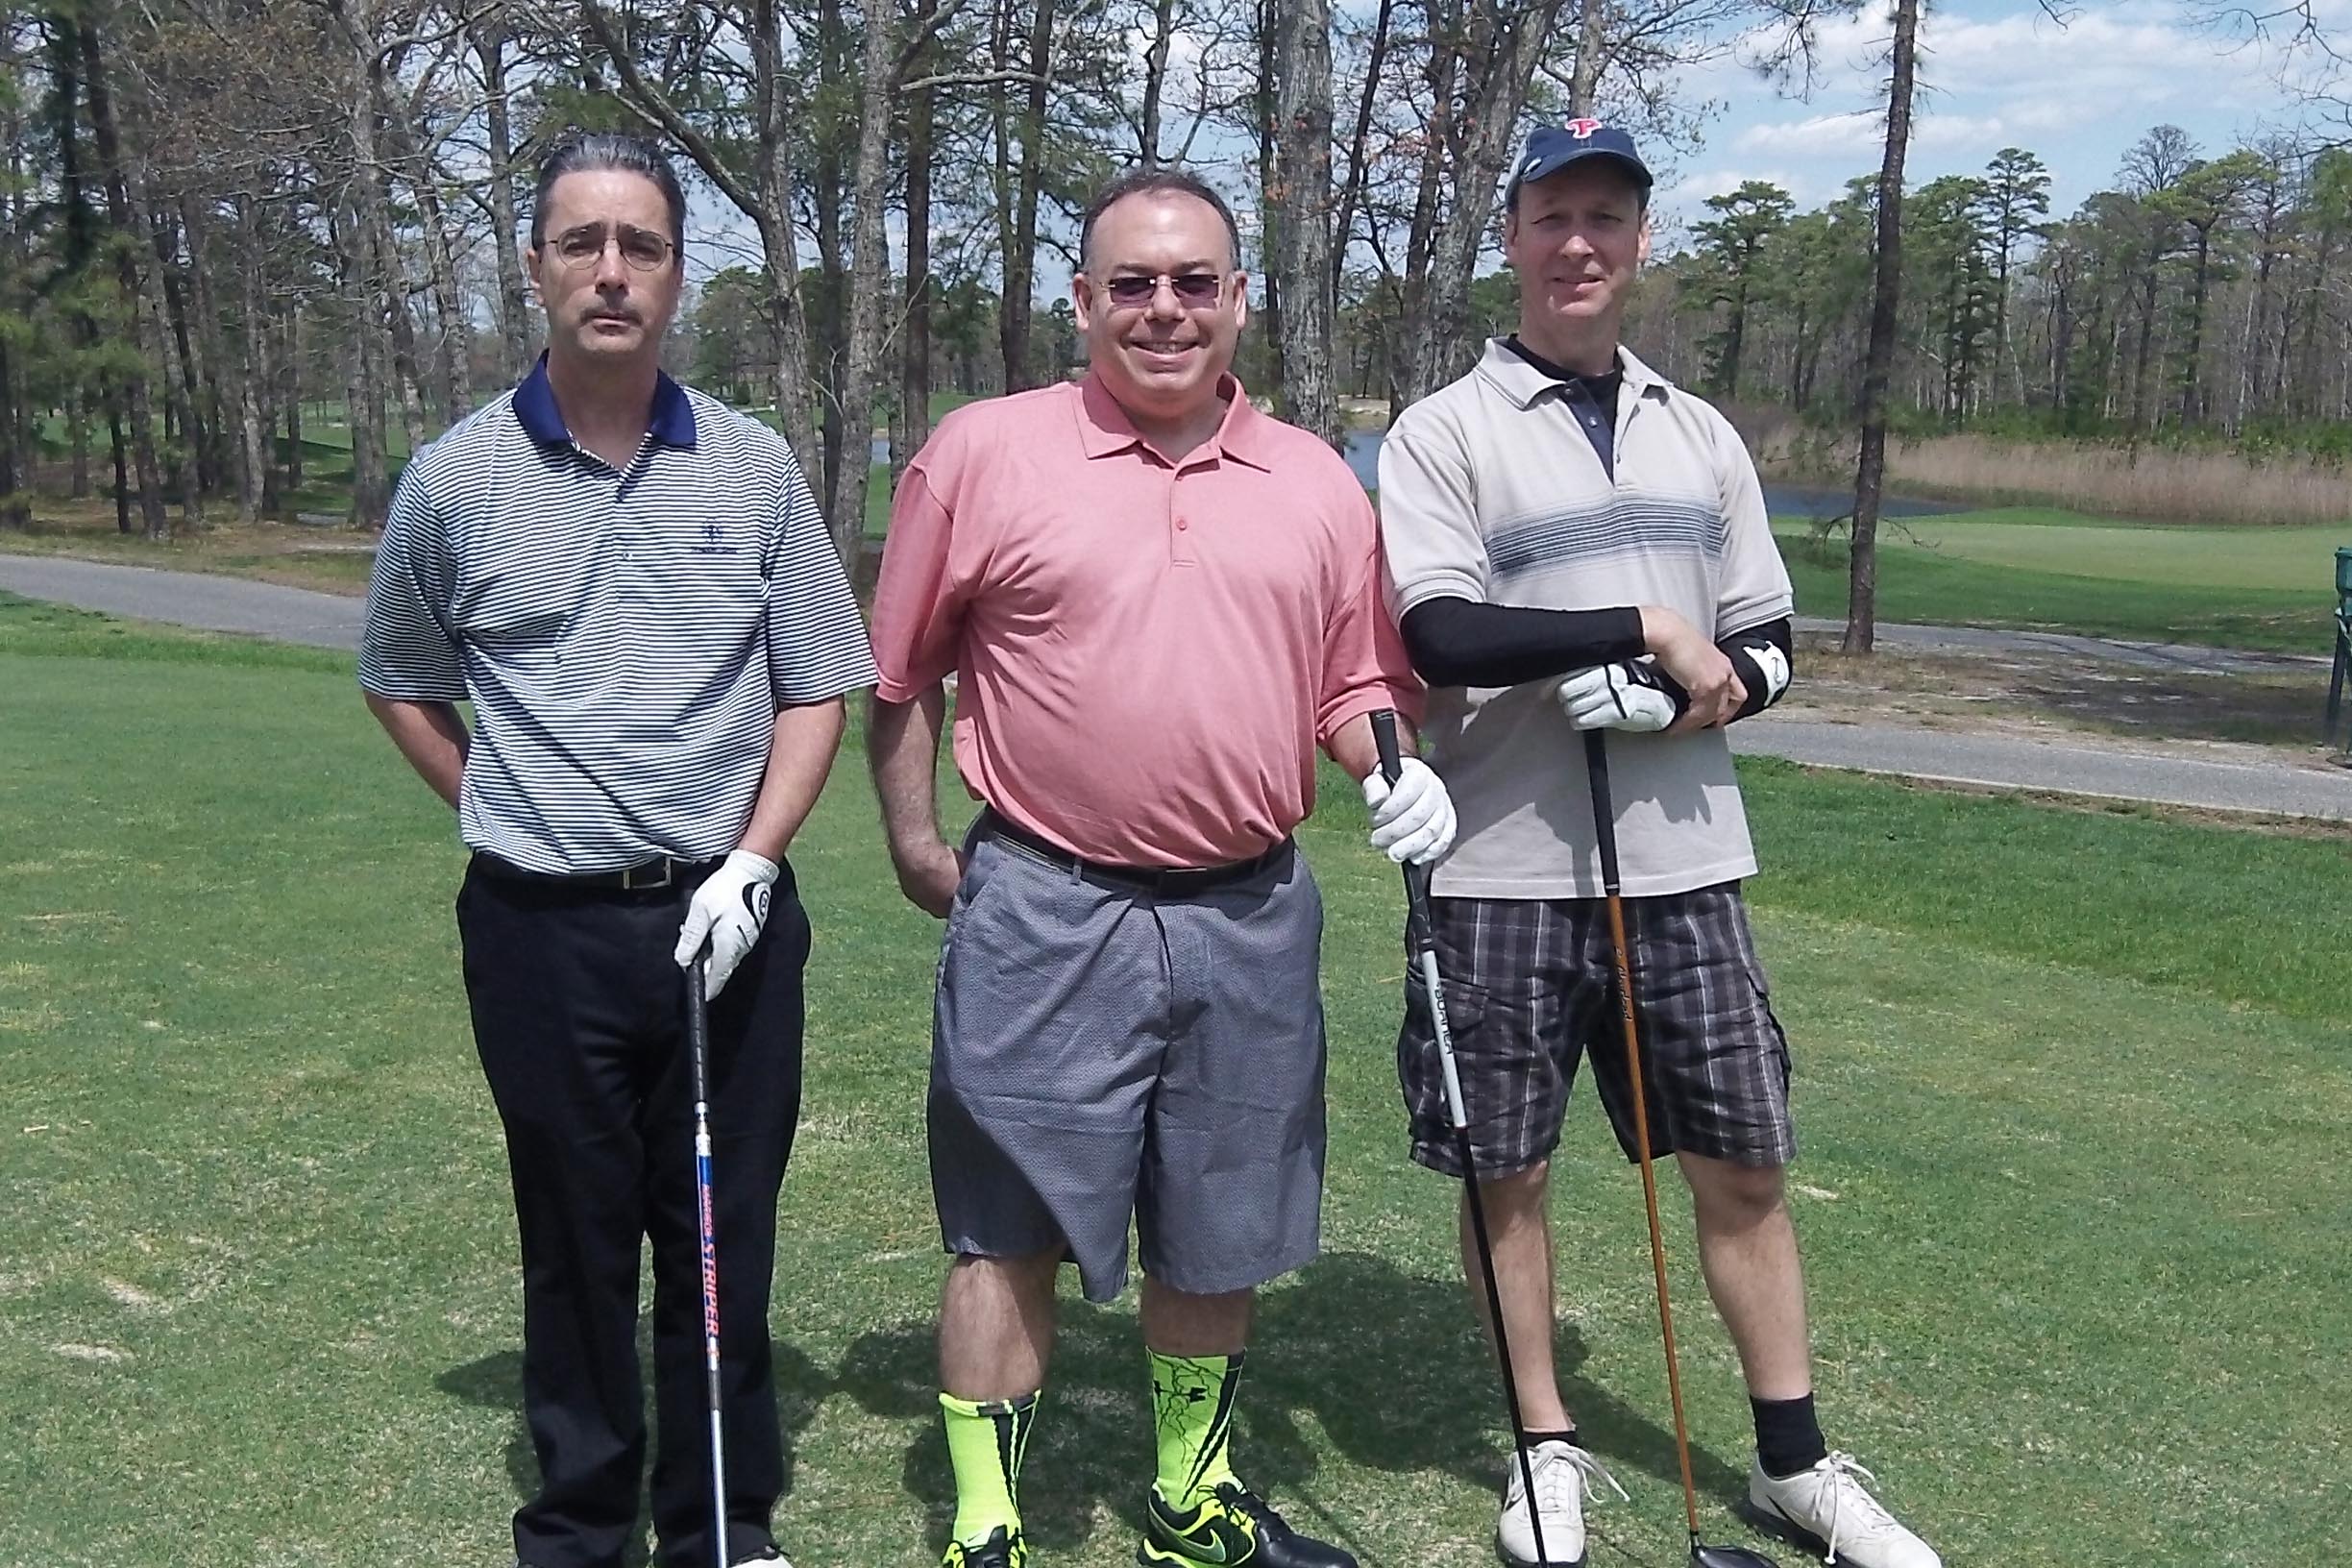  L to R: Brian Fluehr, Alan Vladimir and Phillip Bochey at the 2014 Theta Chi Golf Open, May 2, 2014 